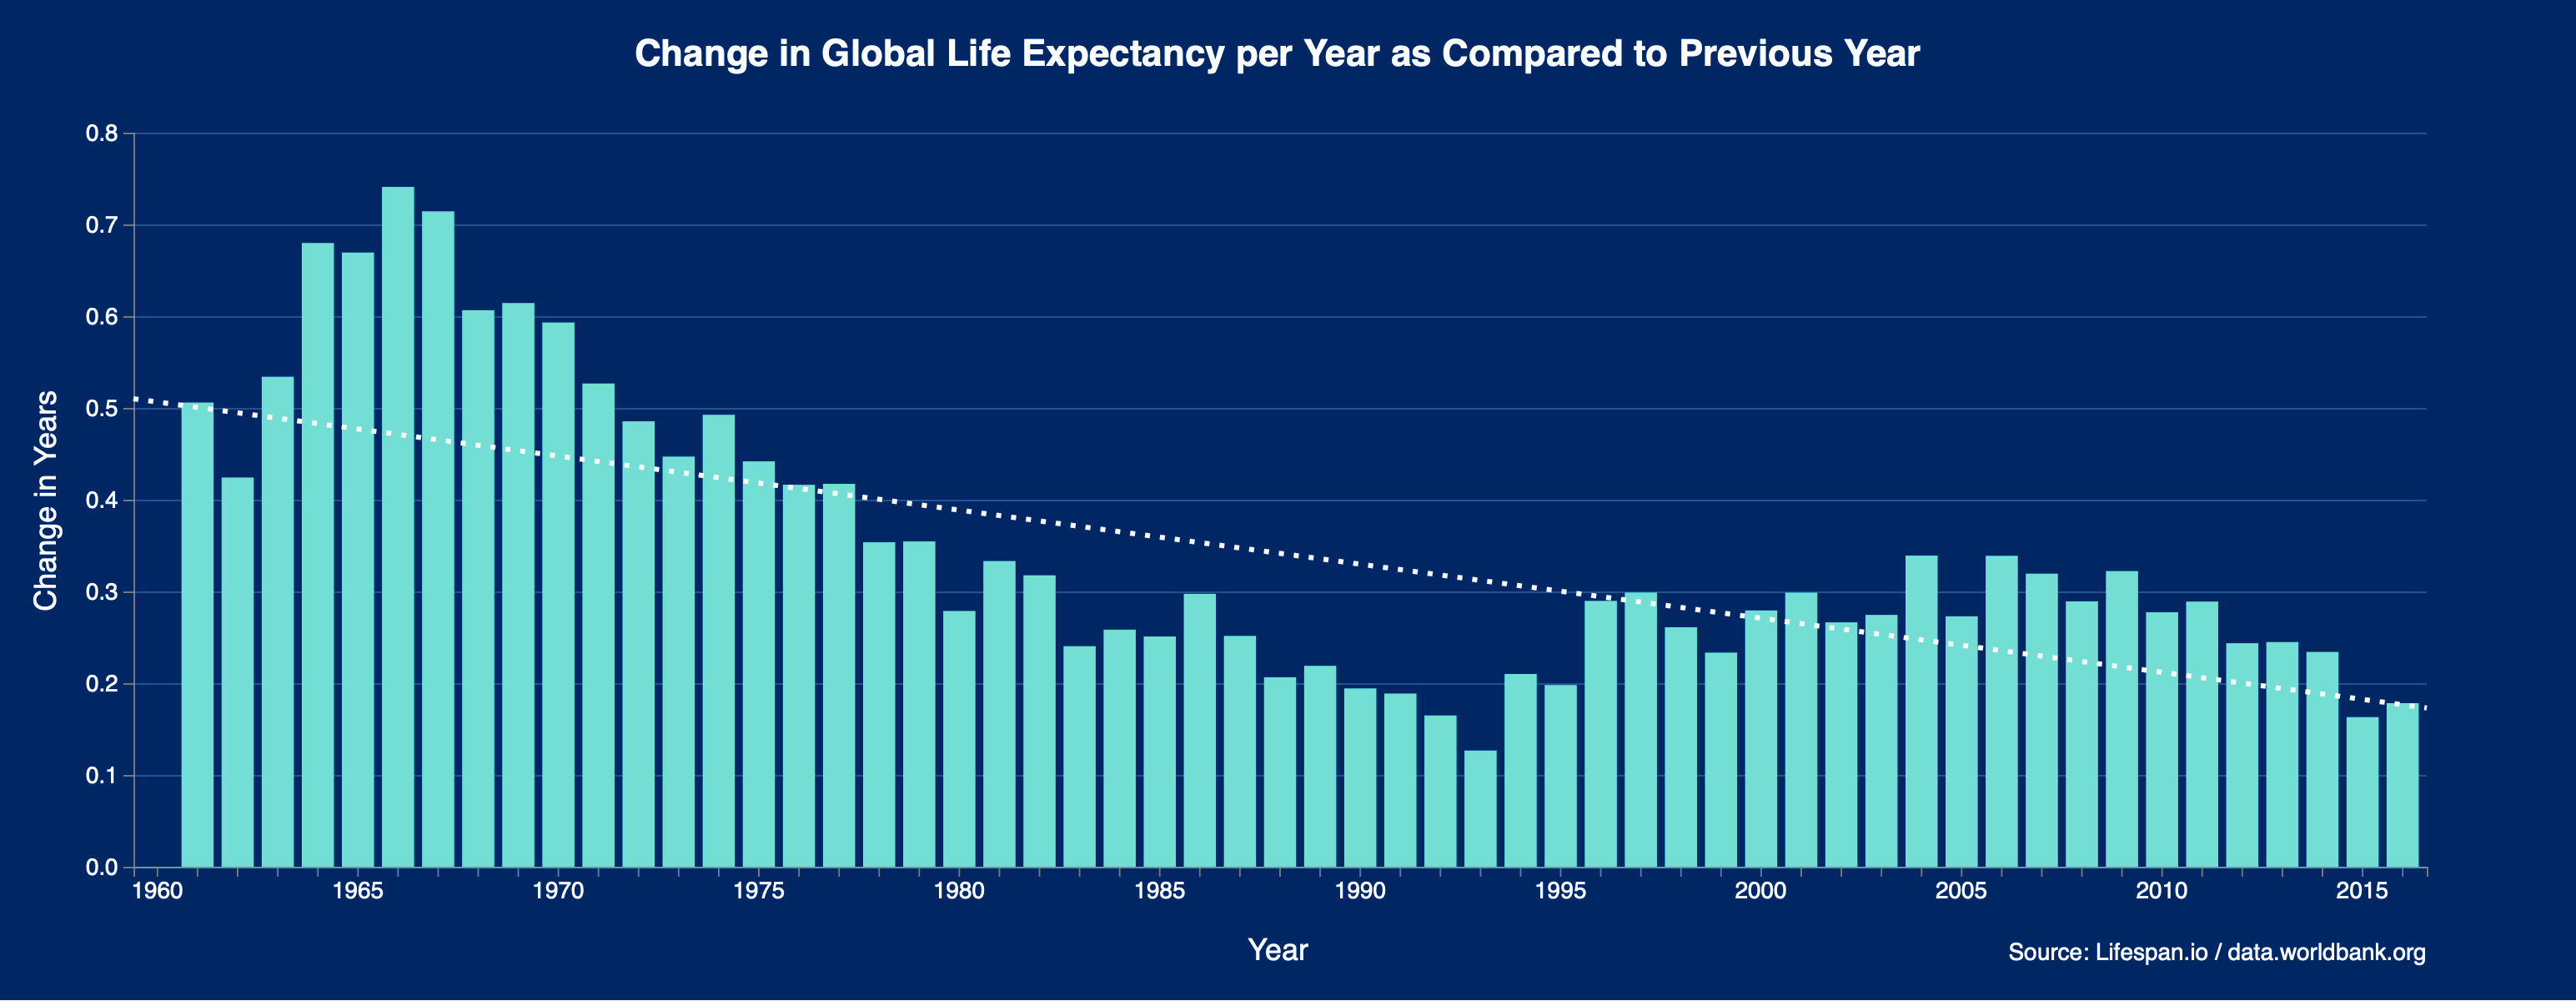 Change in global life expectancy over time